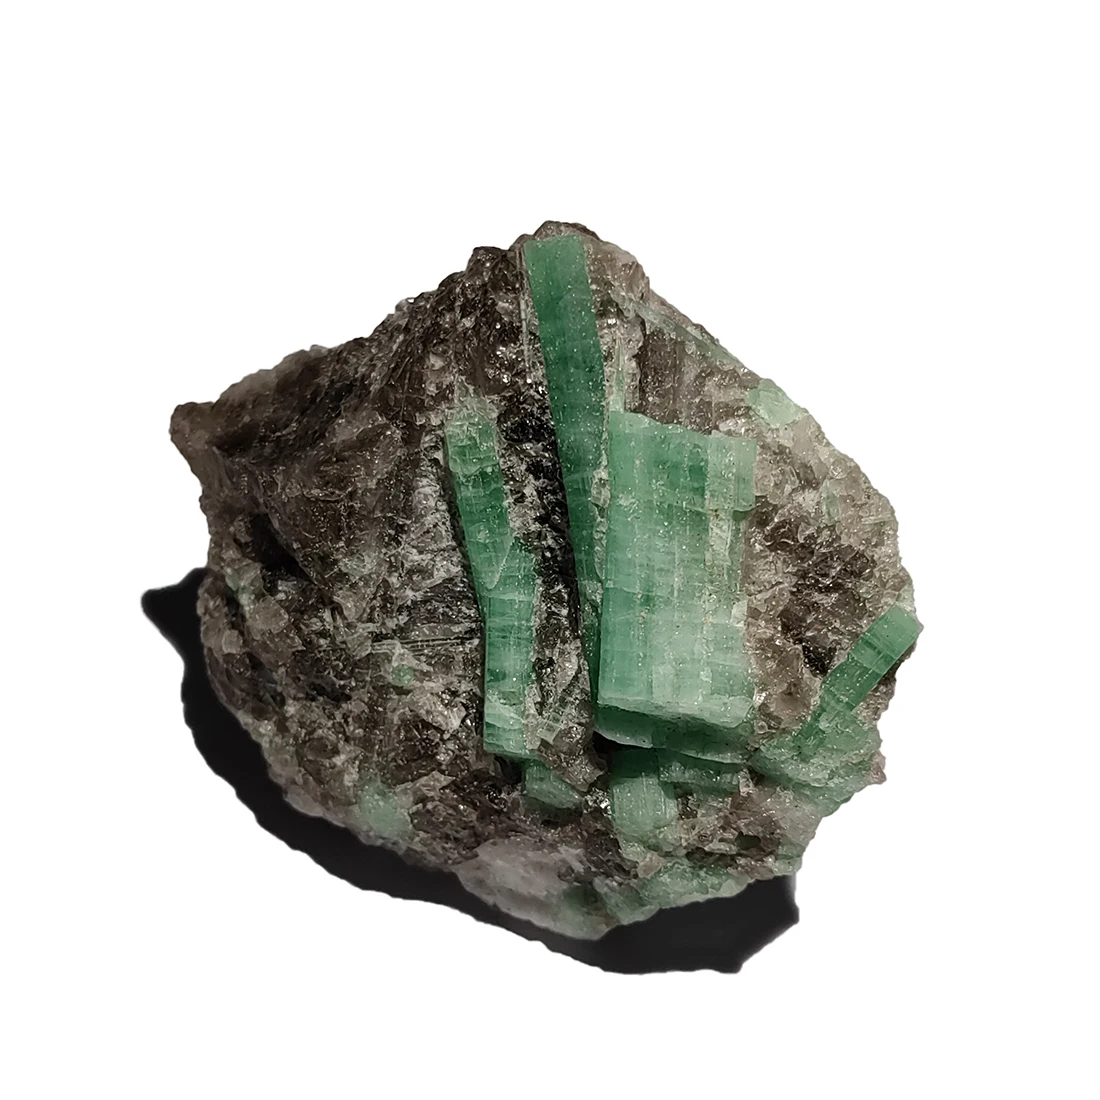 

C3-6G TOP 100% Natural Quartz Emerald Mineral Crystal Specimen Home Decoration From Malipo Wenshan Yunnan Province China